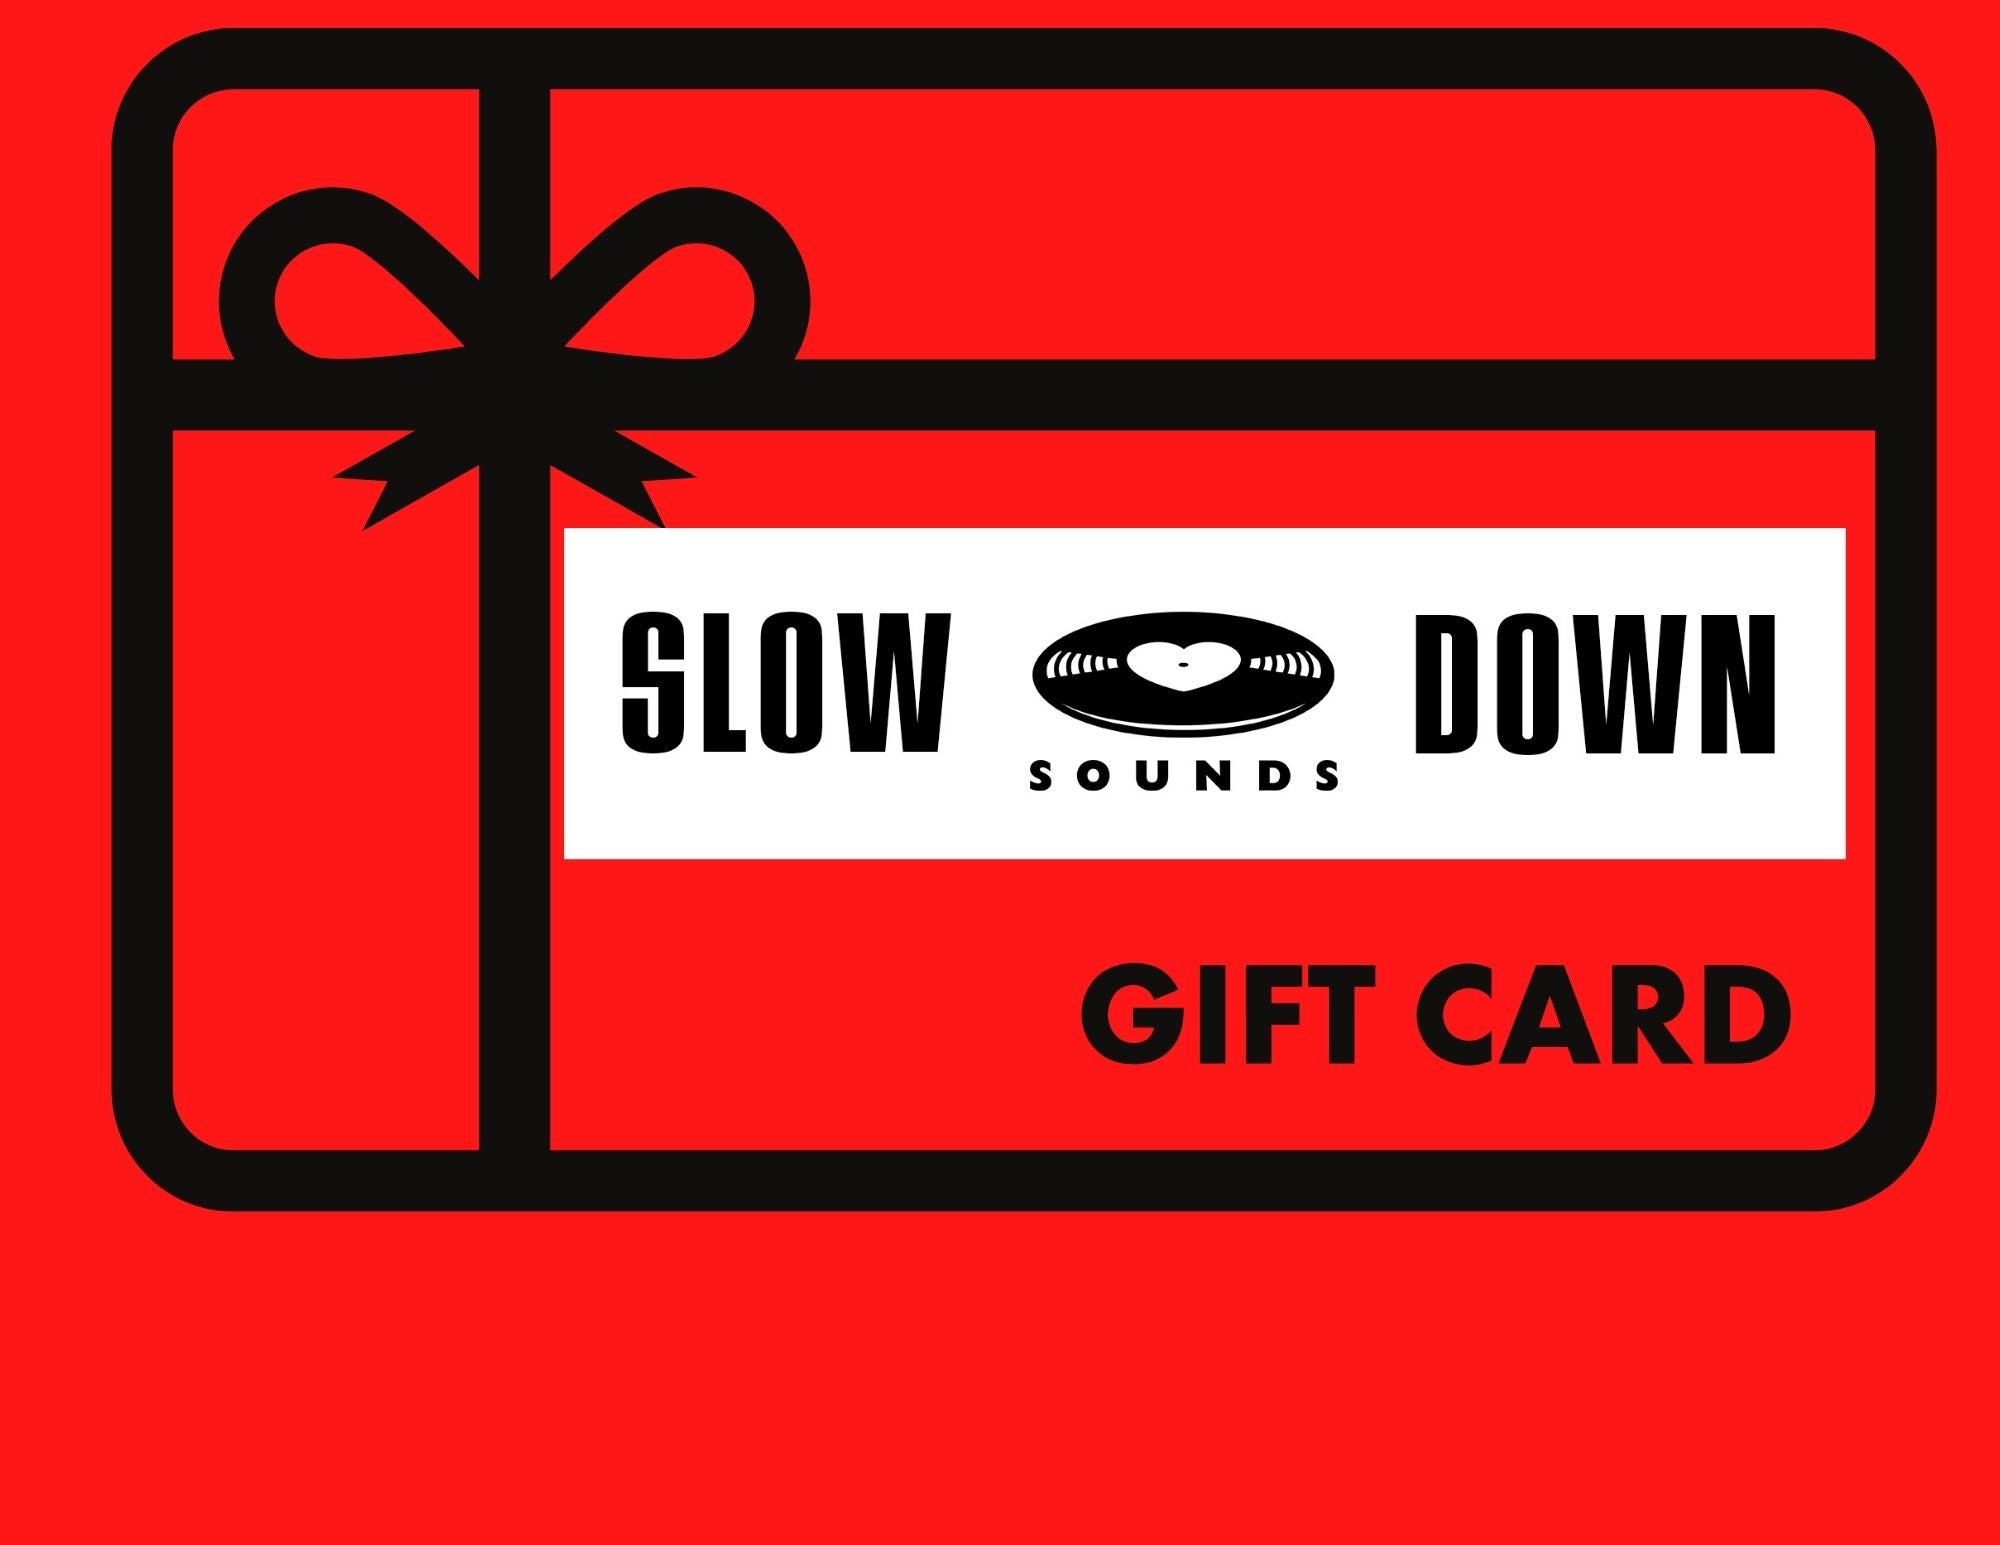 Slow Down Sounds Gift Card